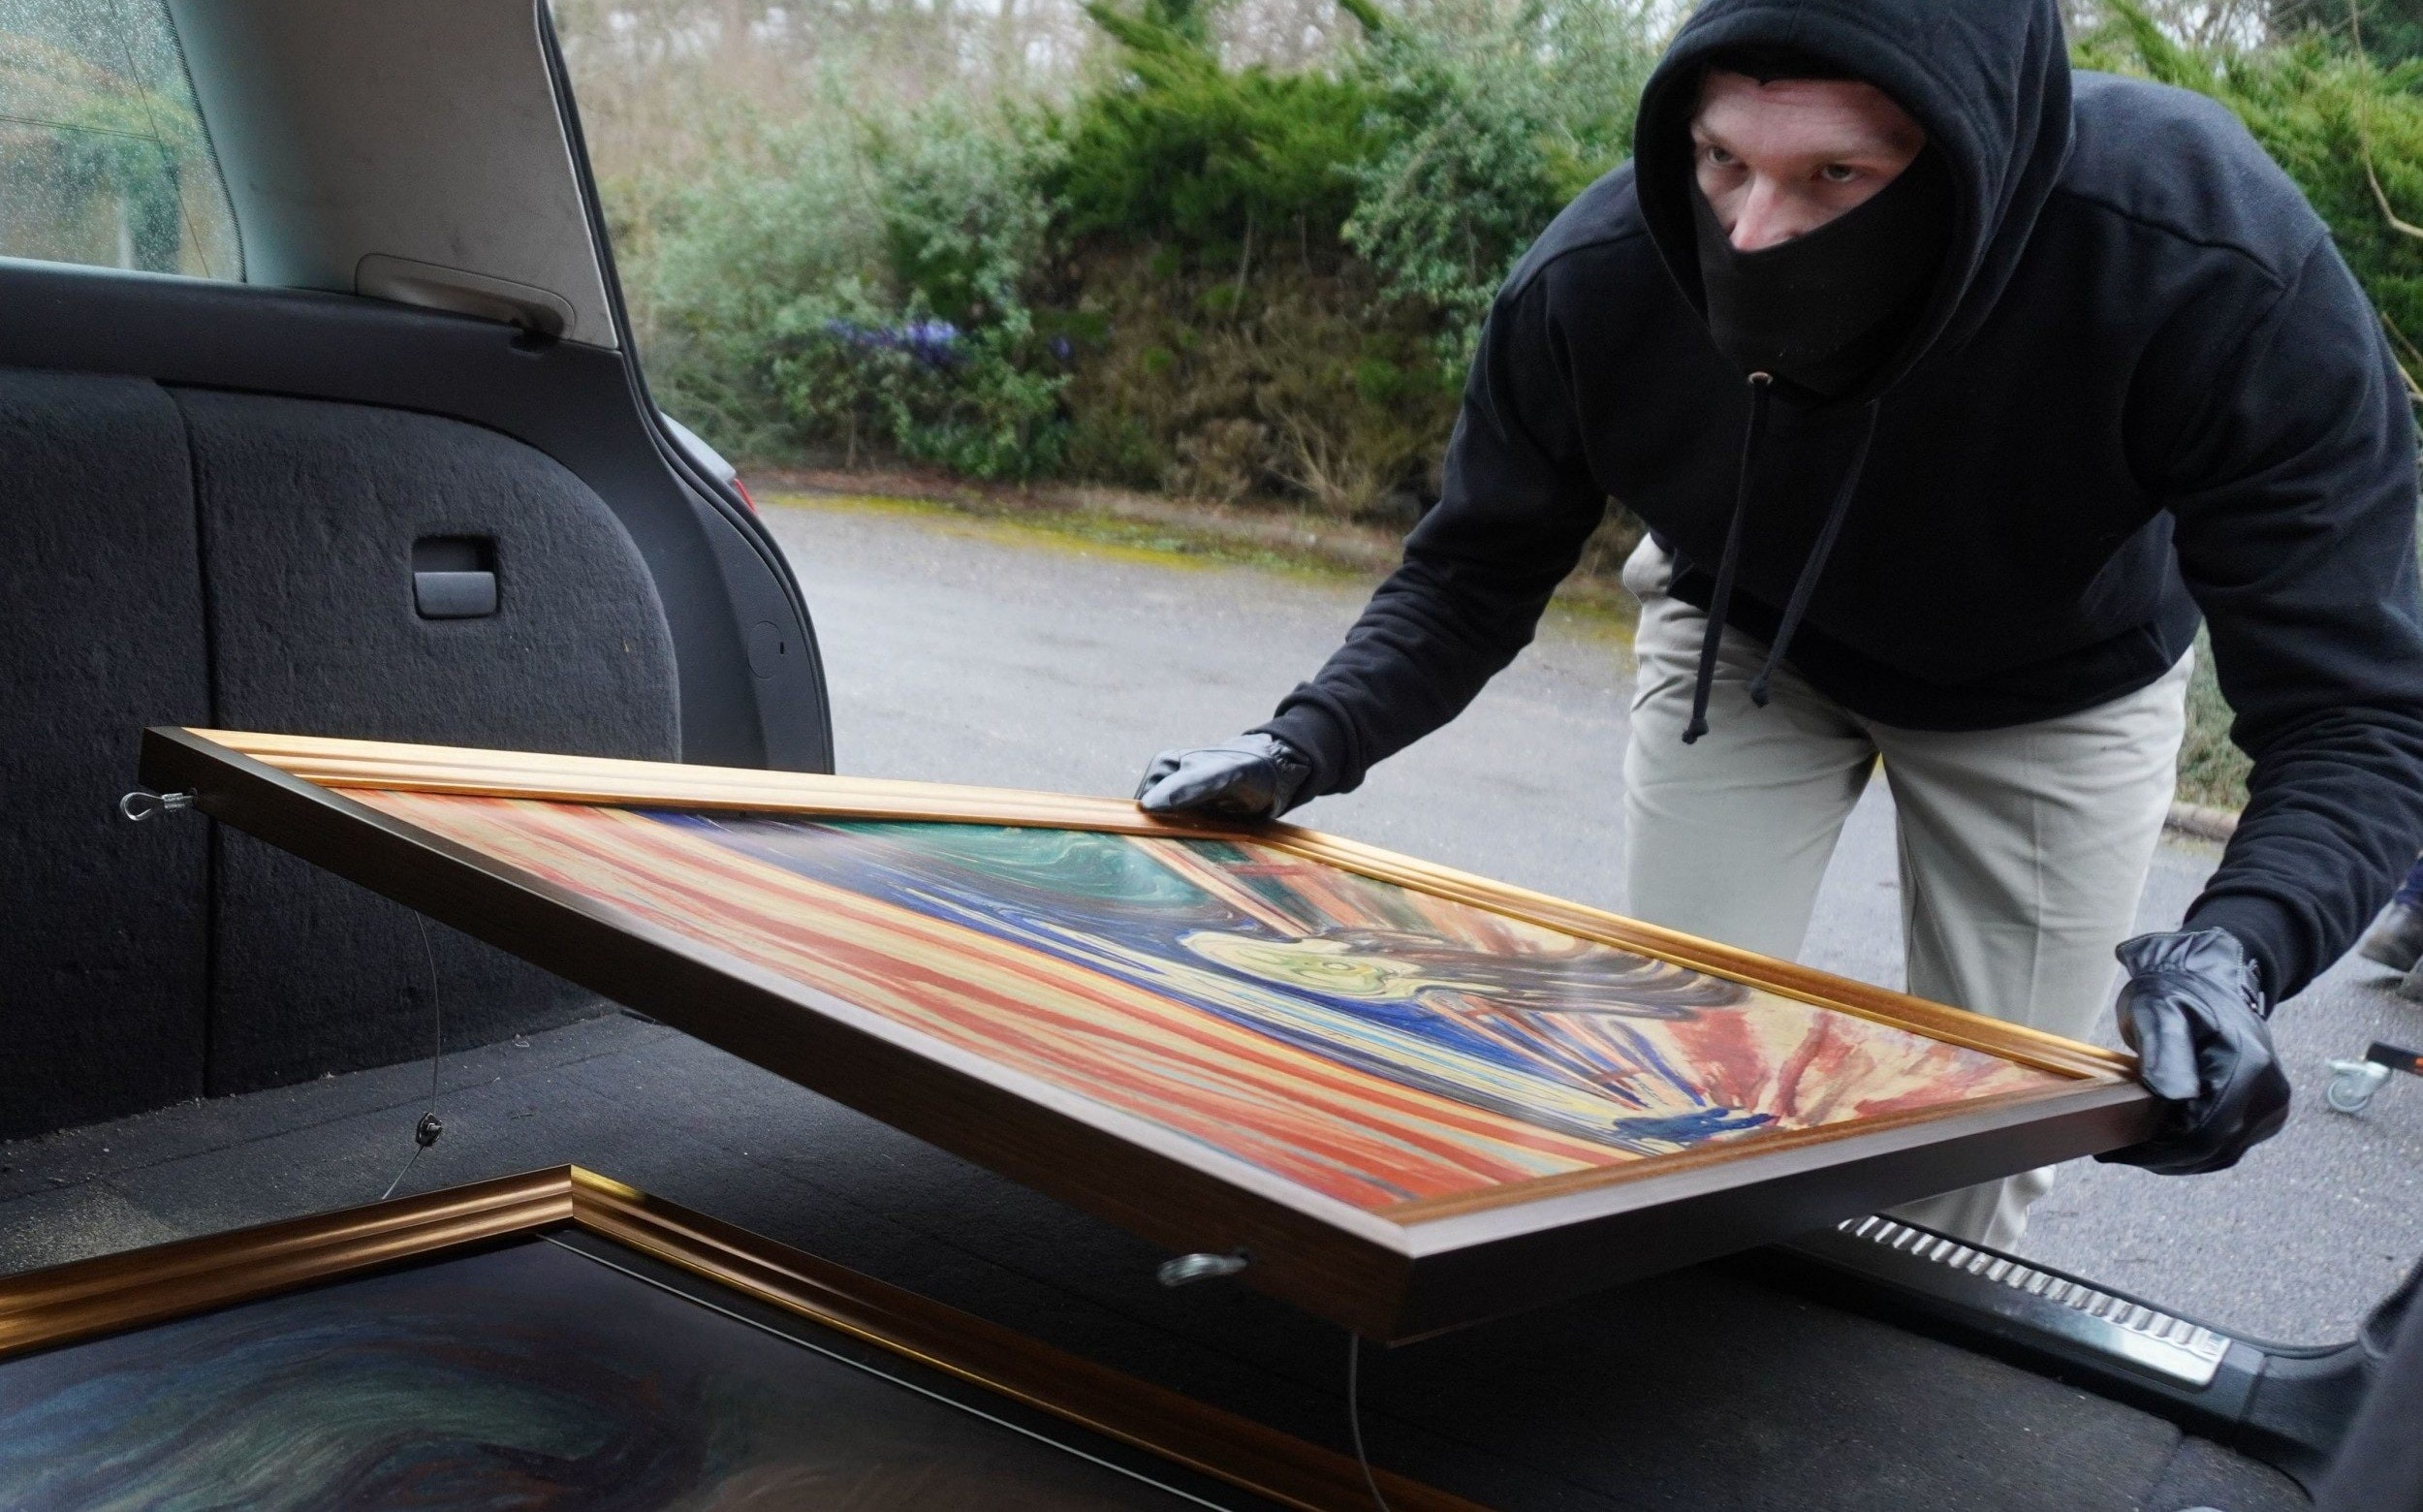 Stolen :Catching the Art Thieves